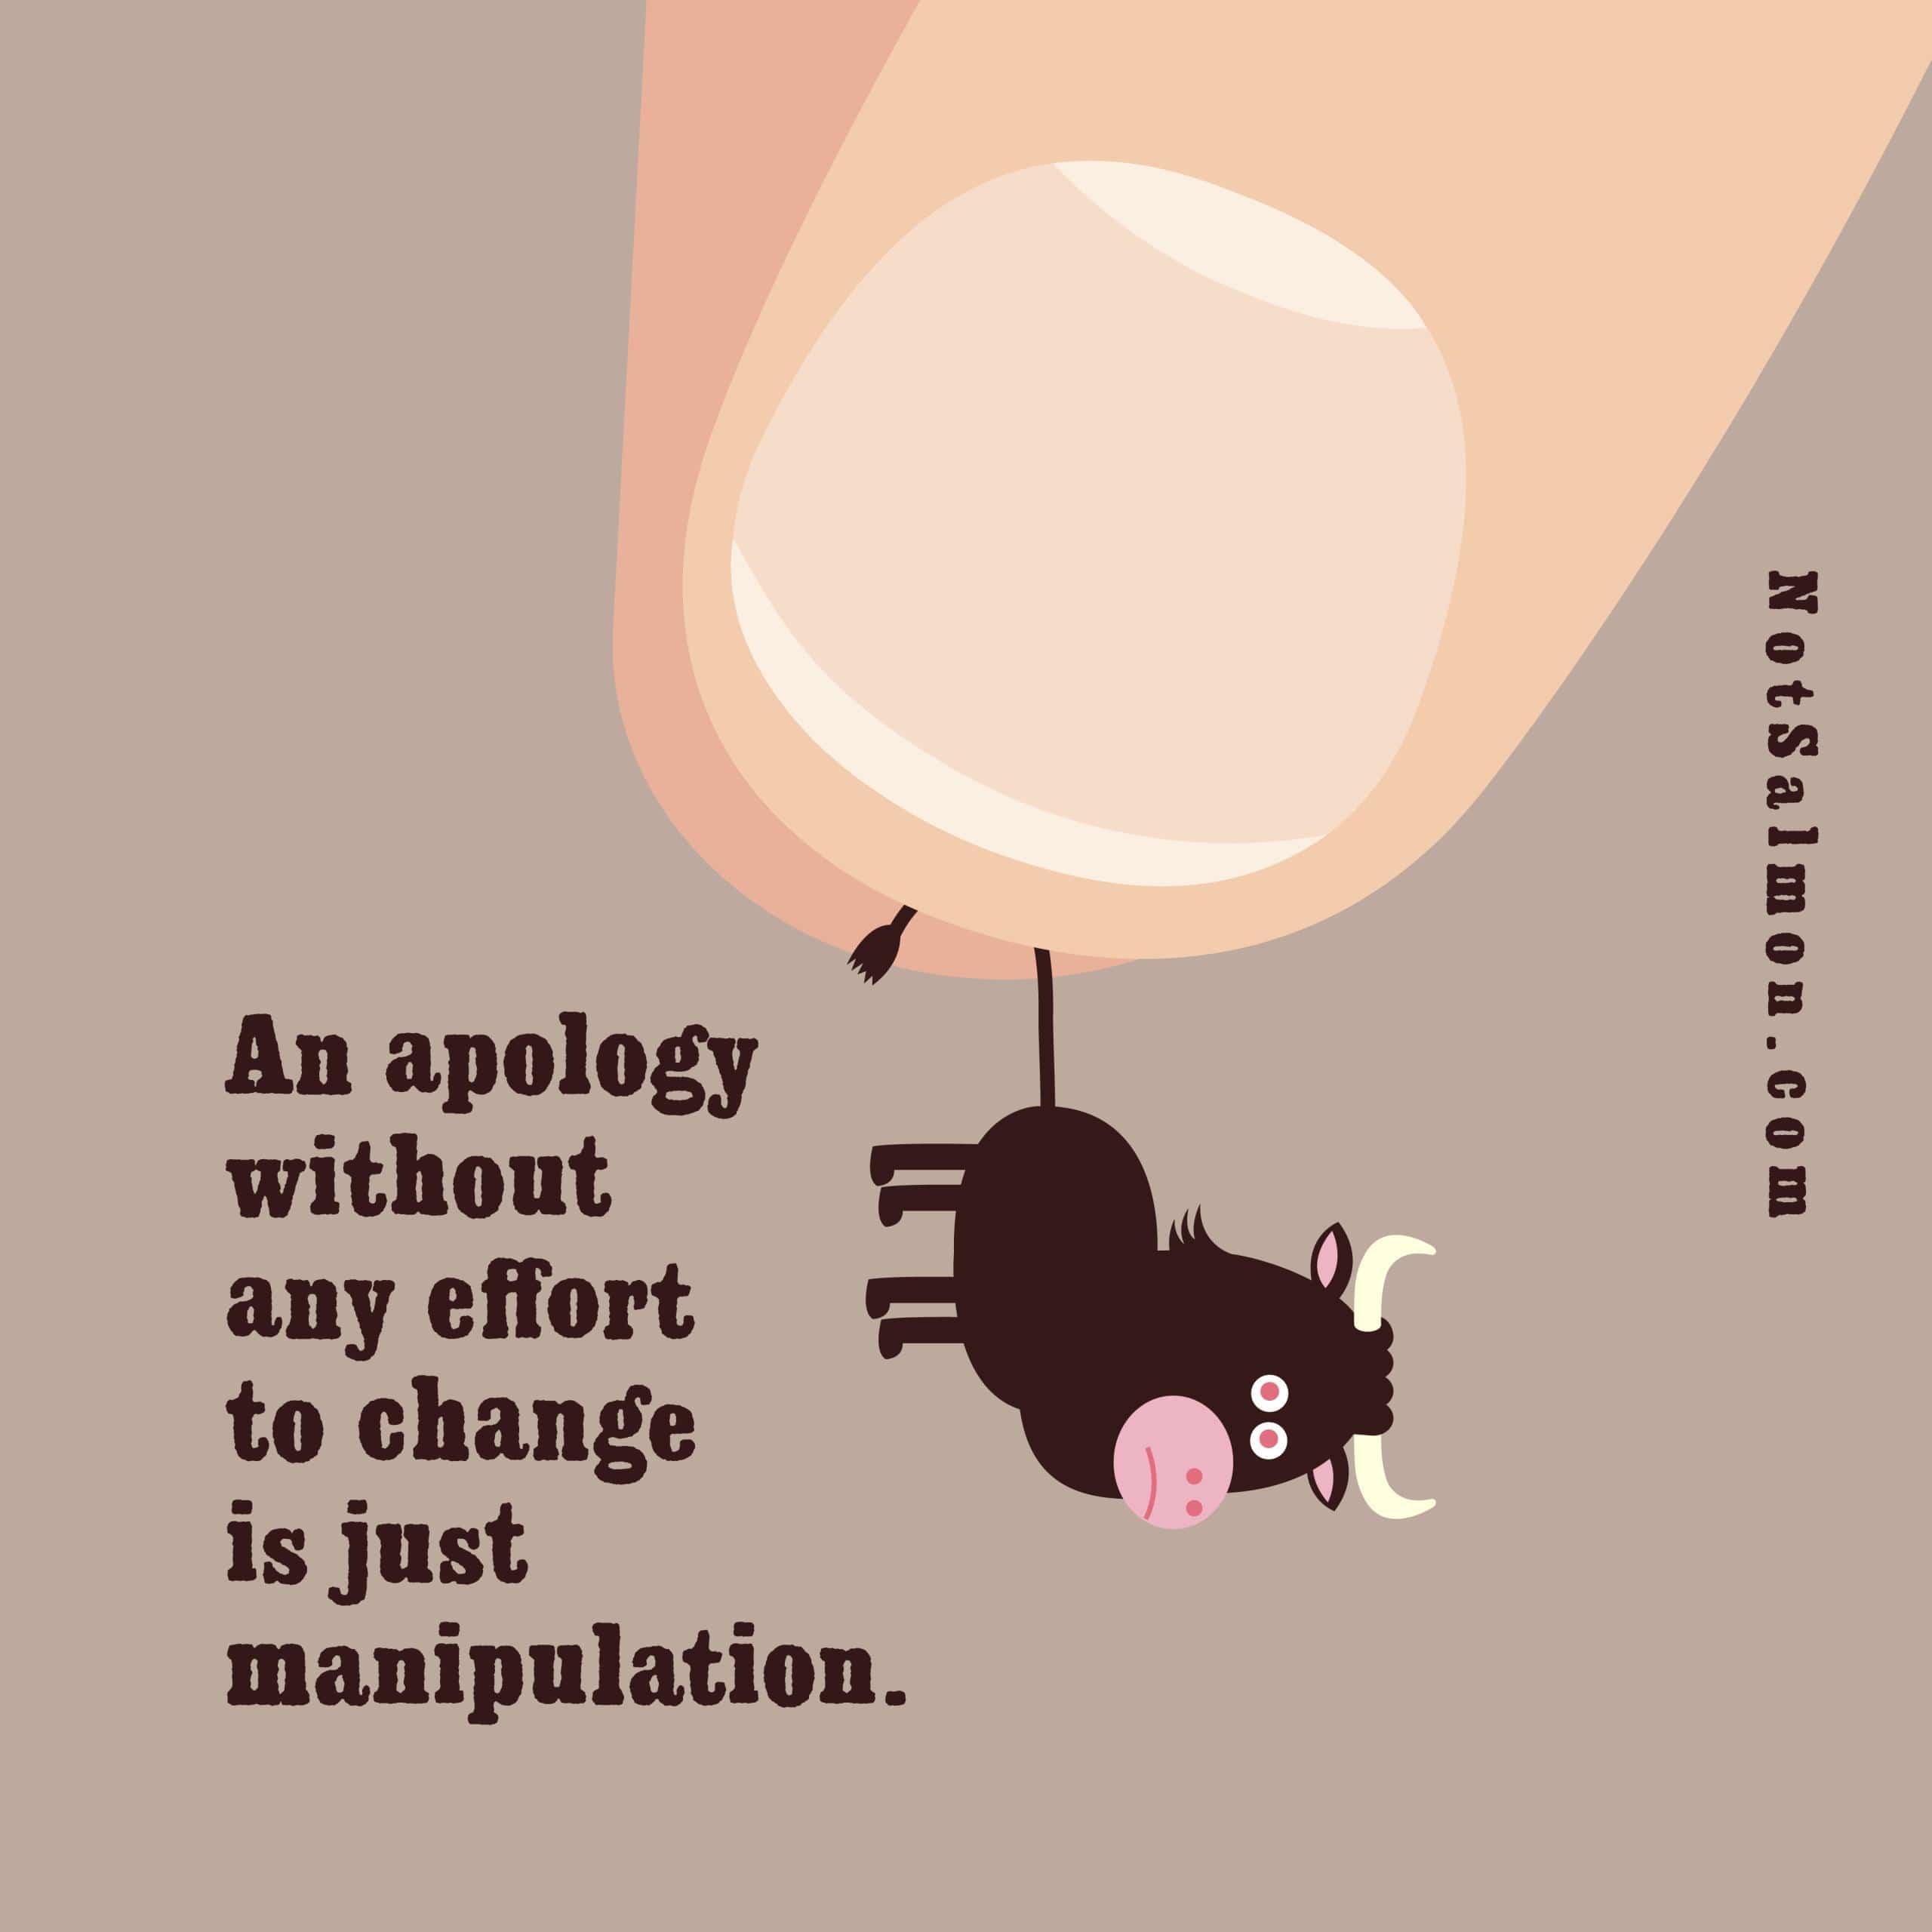 apology without any effort to change is just manipulation